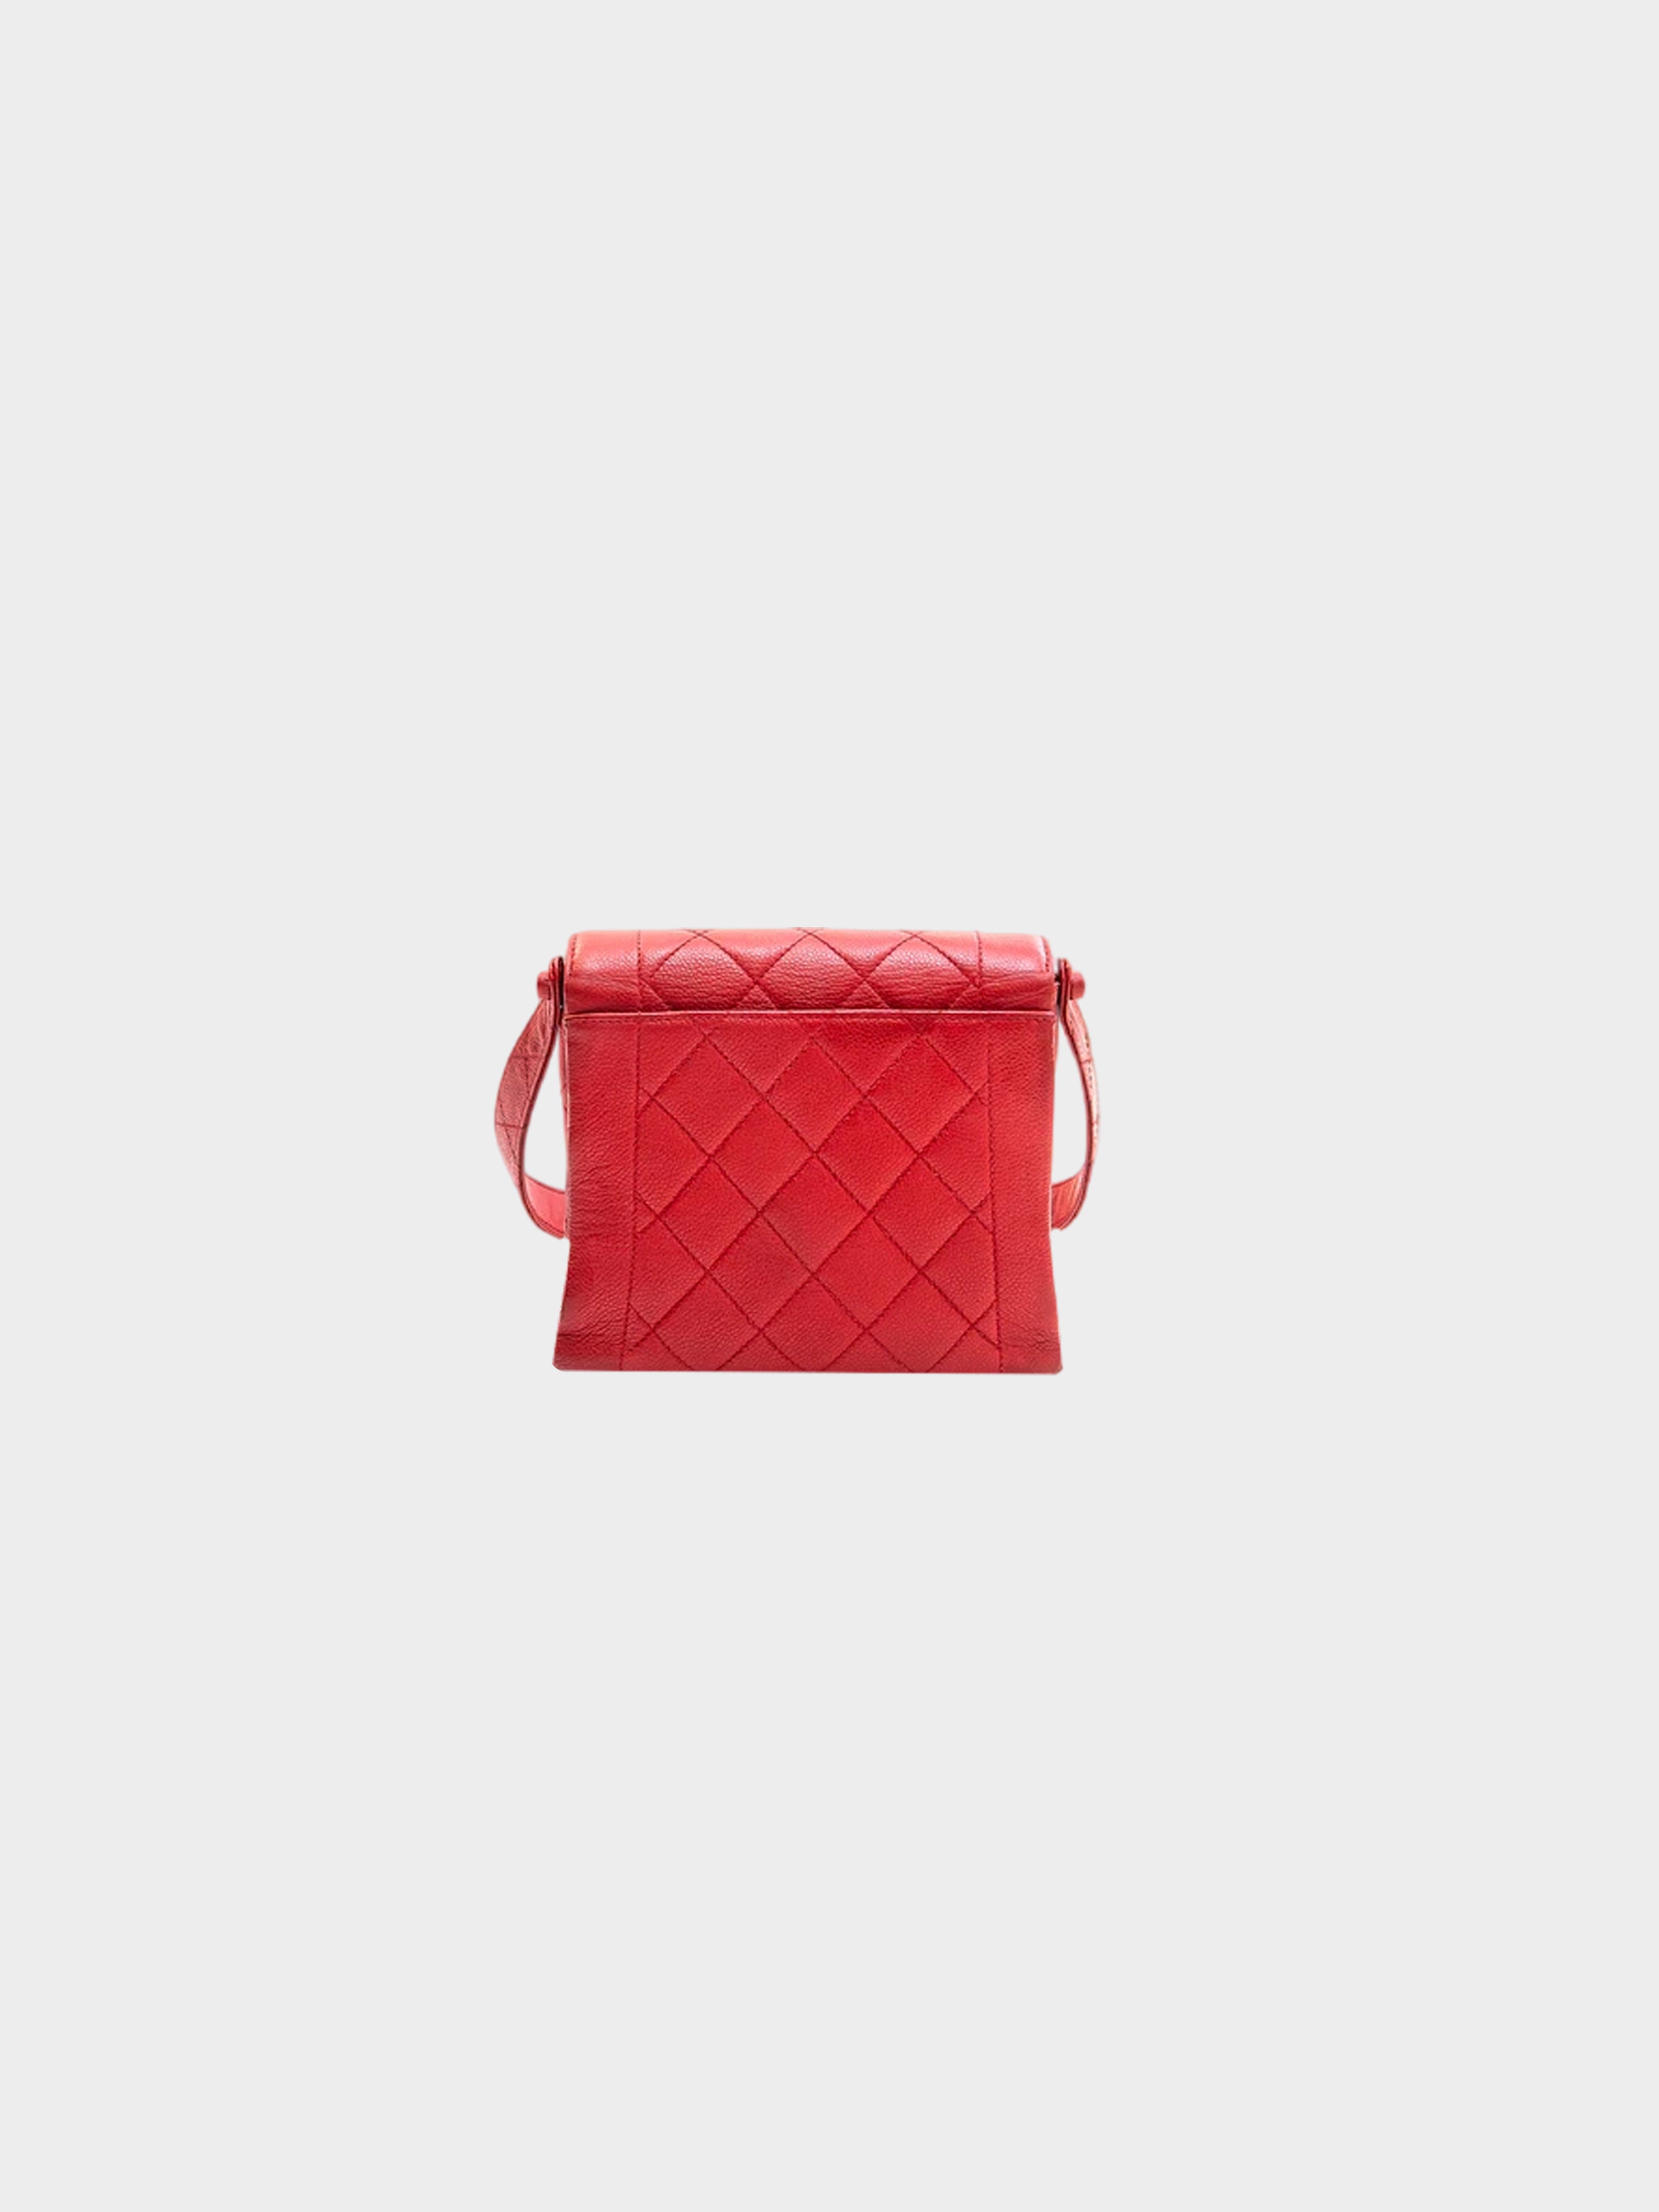 Chanel Diana Quilted Red Lambskin Flap Mademoiselle Chain Shoulder